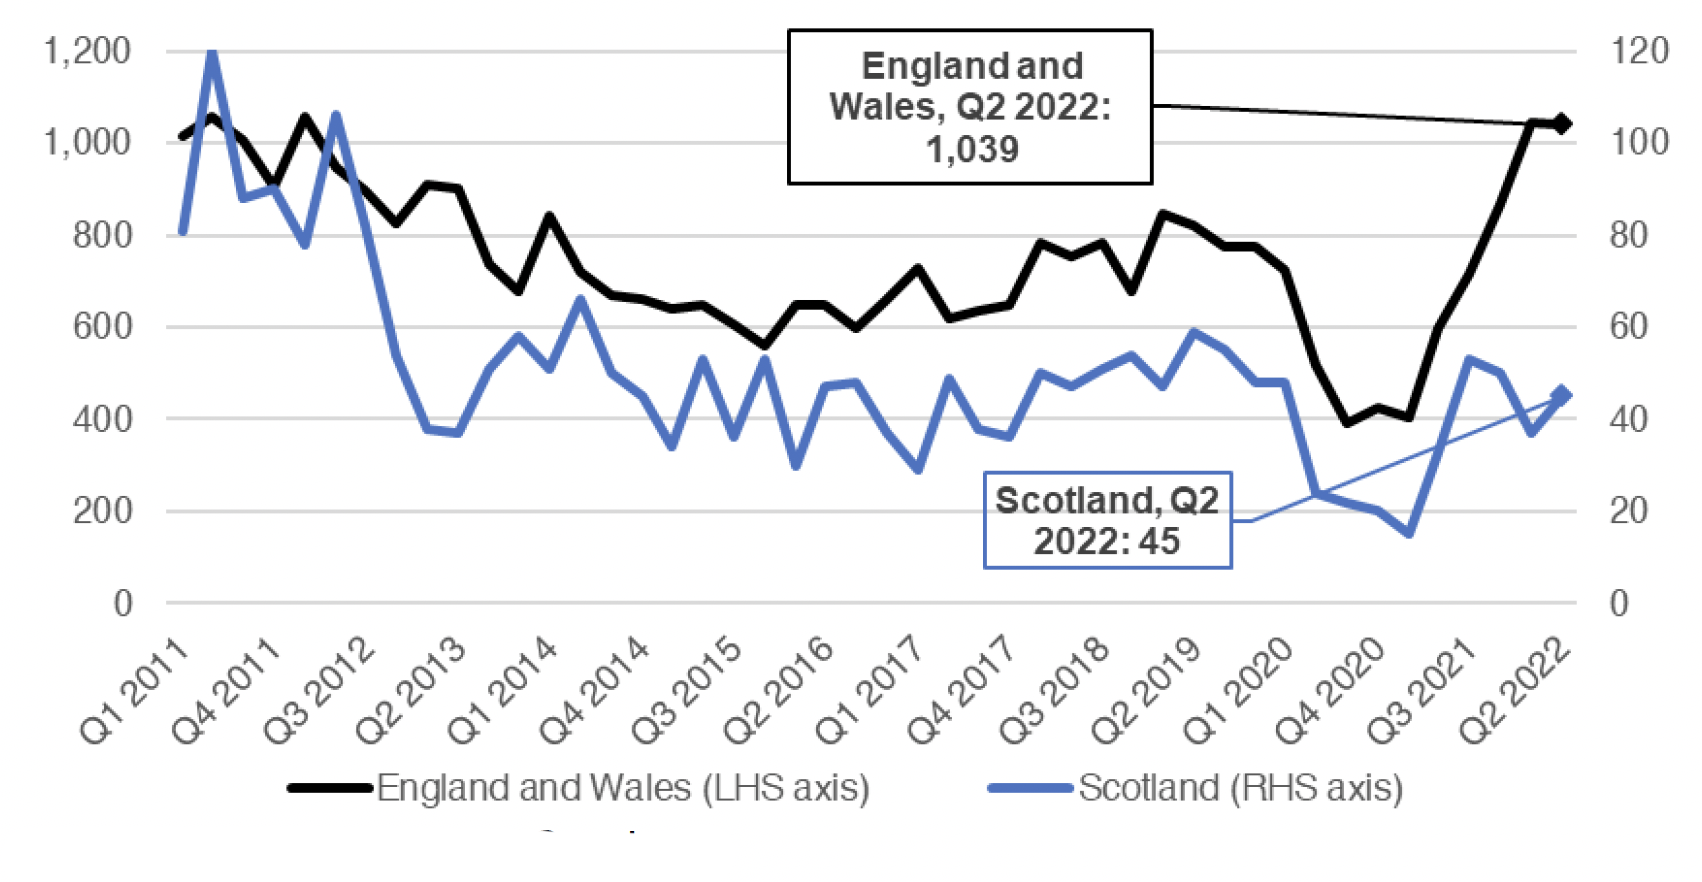 Chart 10.2 shows how the number of registered company insolvencies in the construction sector have progressed on a quarterly basis in England and Wales and in Scotland respectively. This covers the period from Q1 2011 to Q2 2022.